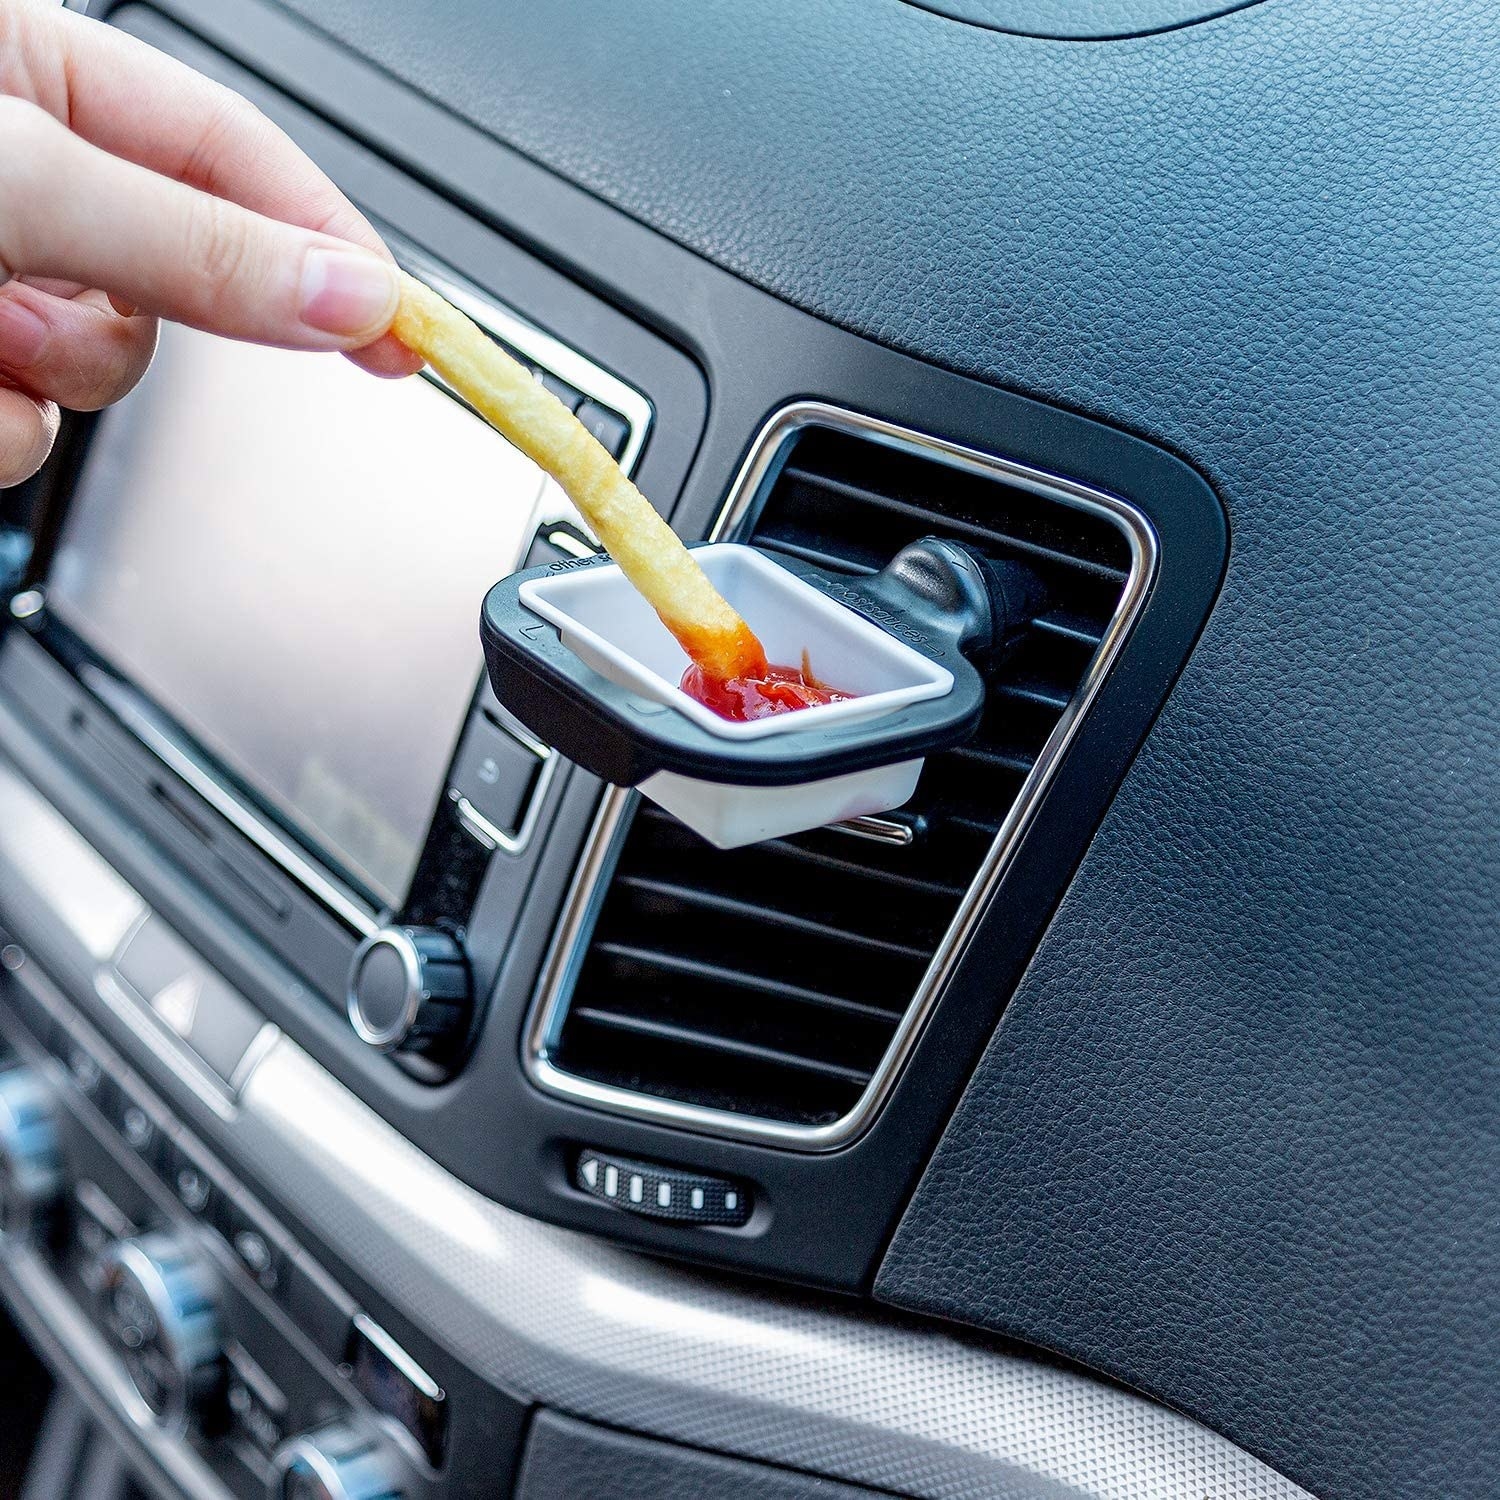 the sauce holder clipped to a car vent with ketchup in it and someone dipping a fry into it